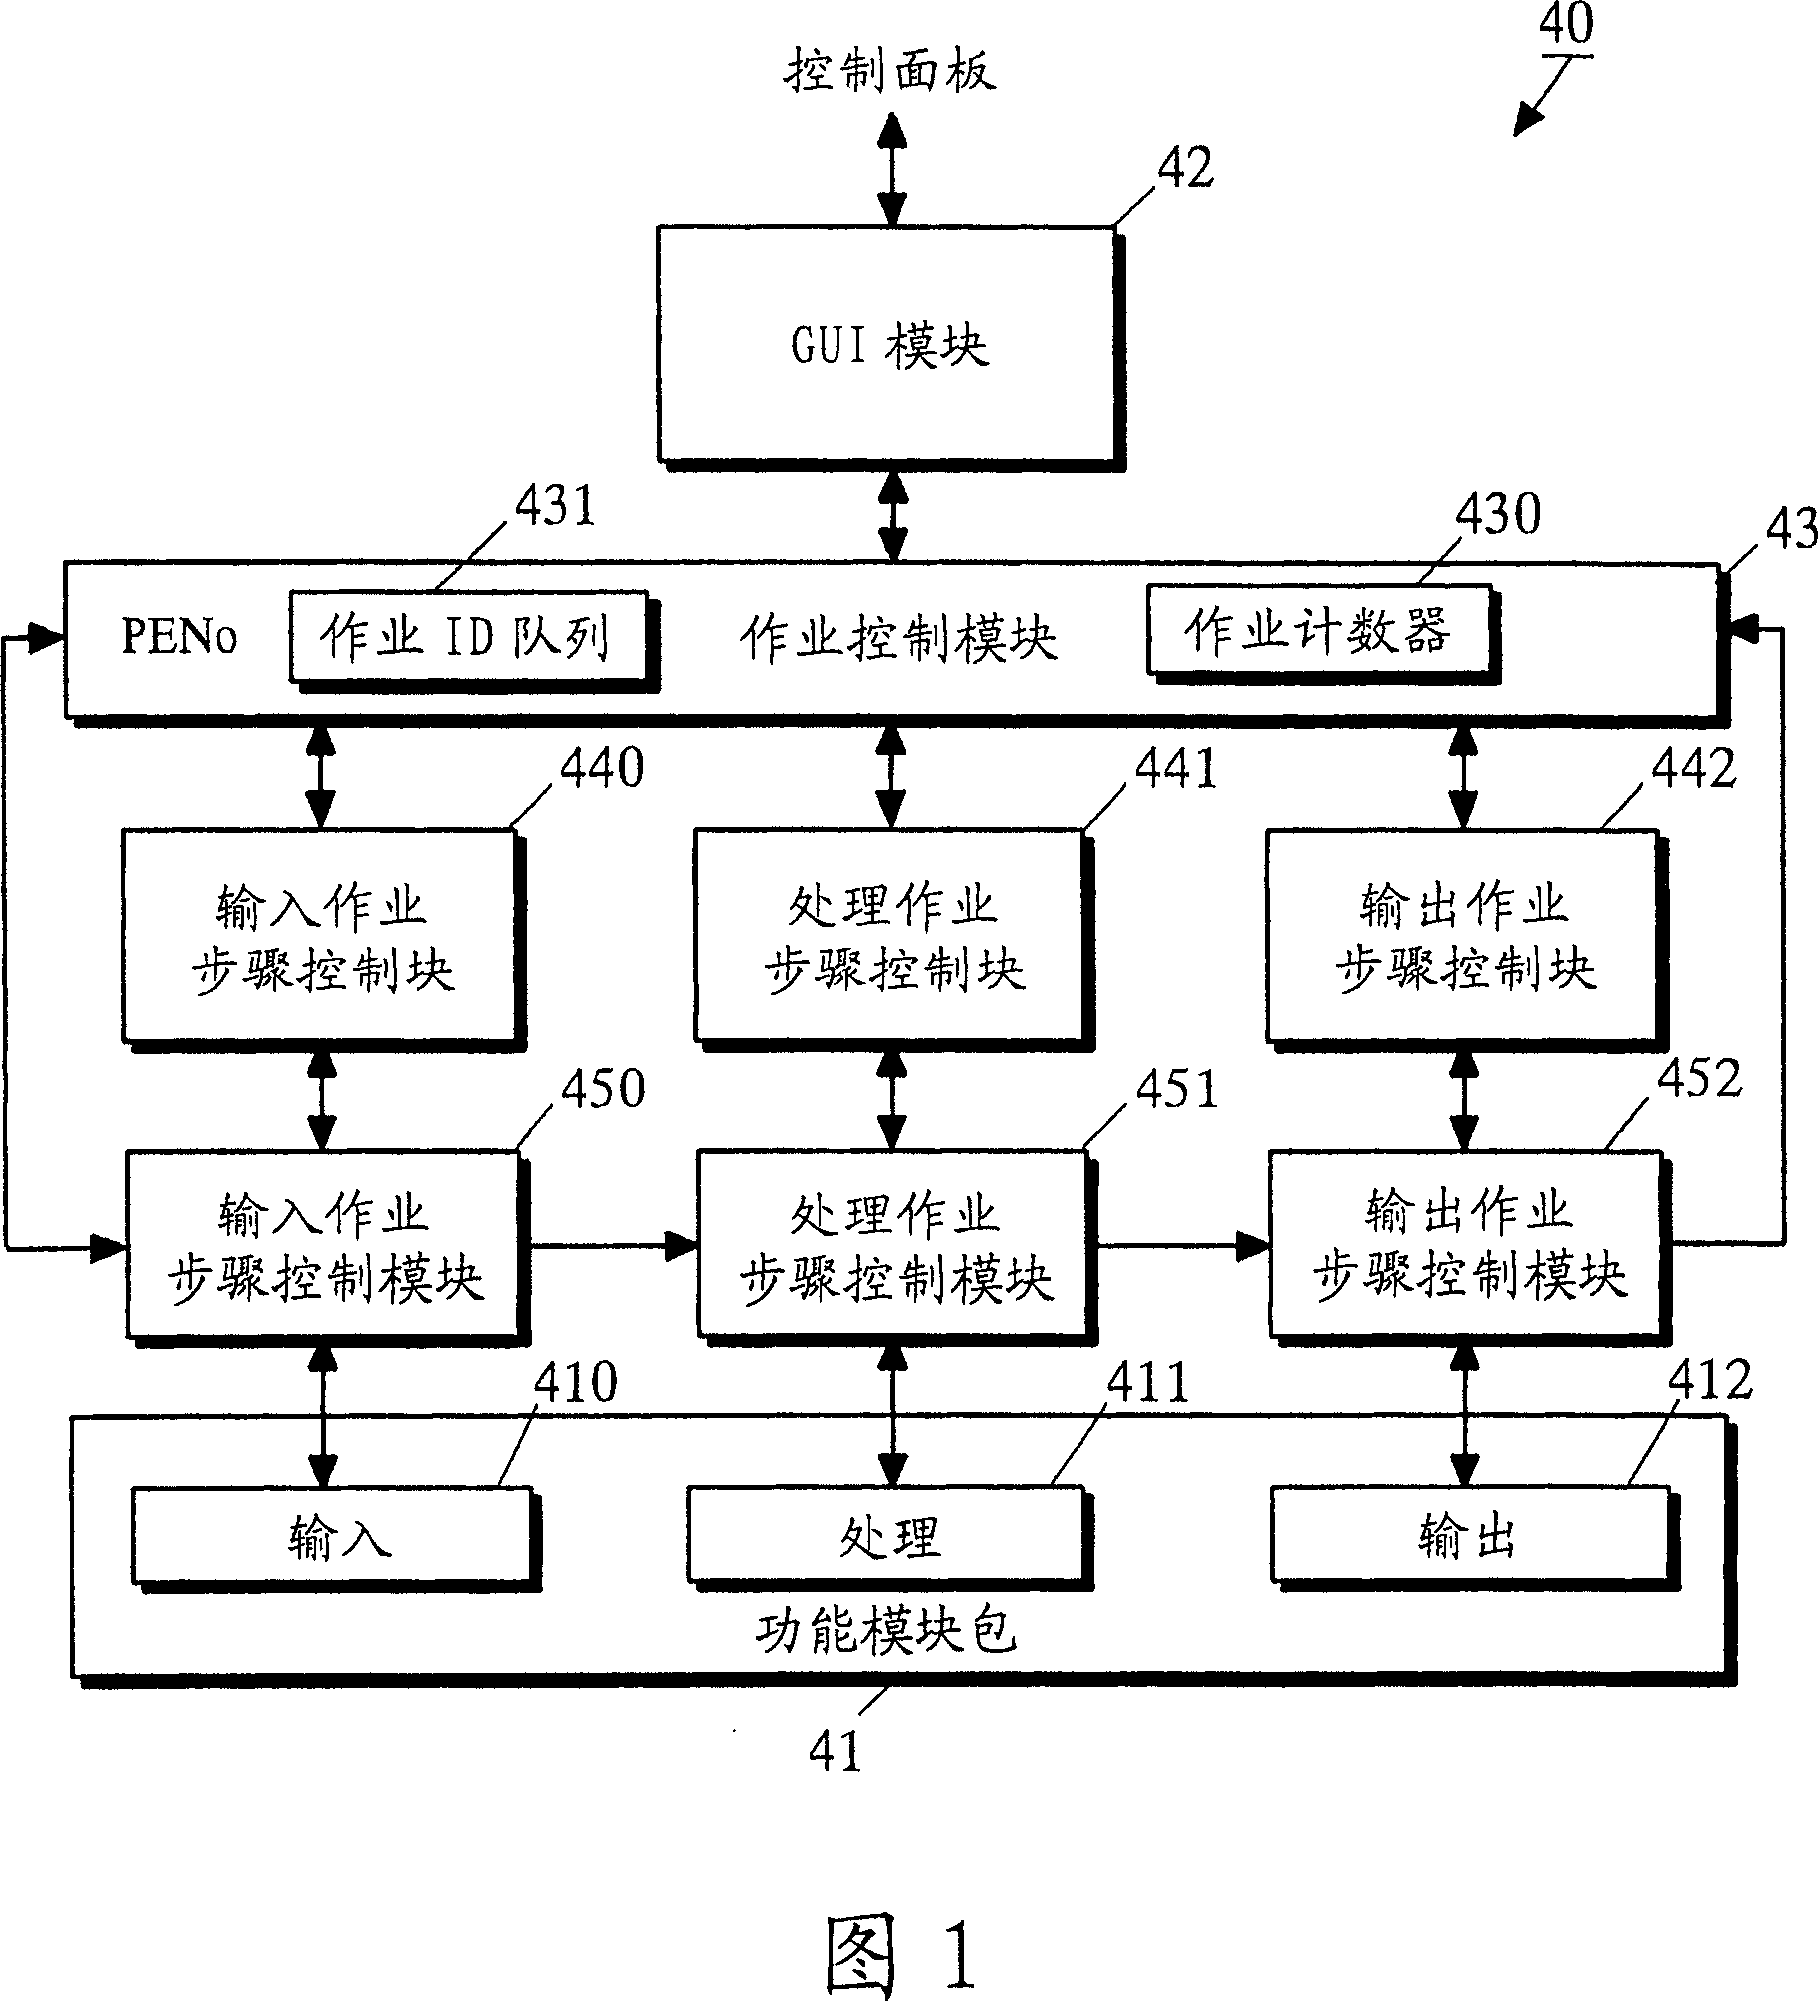 Multi-function peripheral apparatus for processing unified job steps